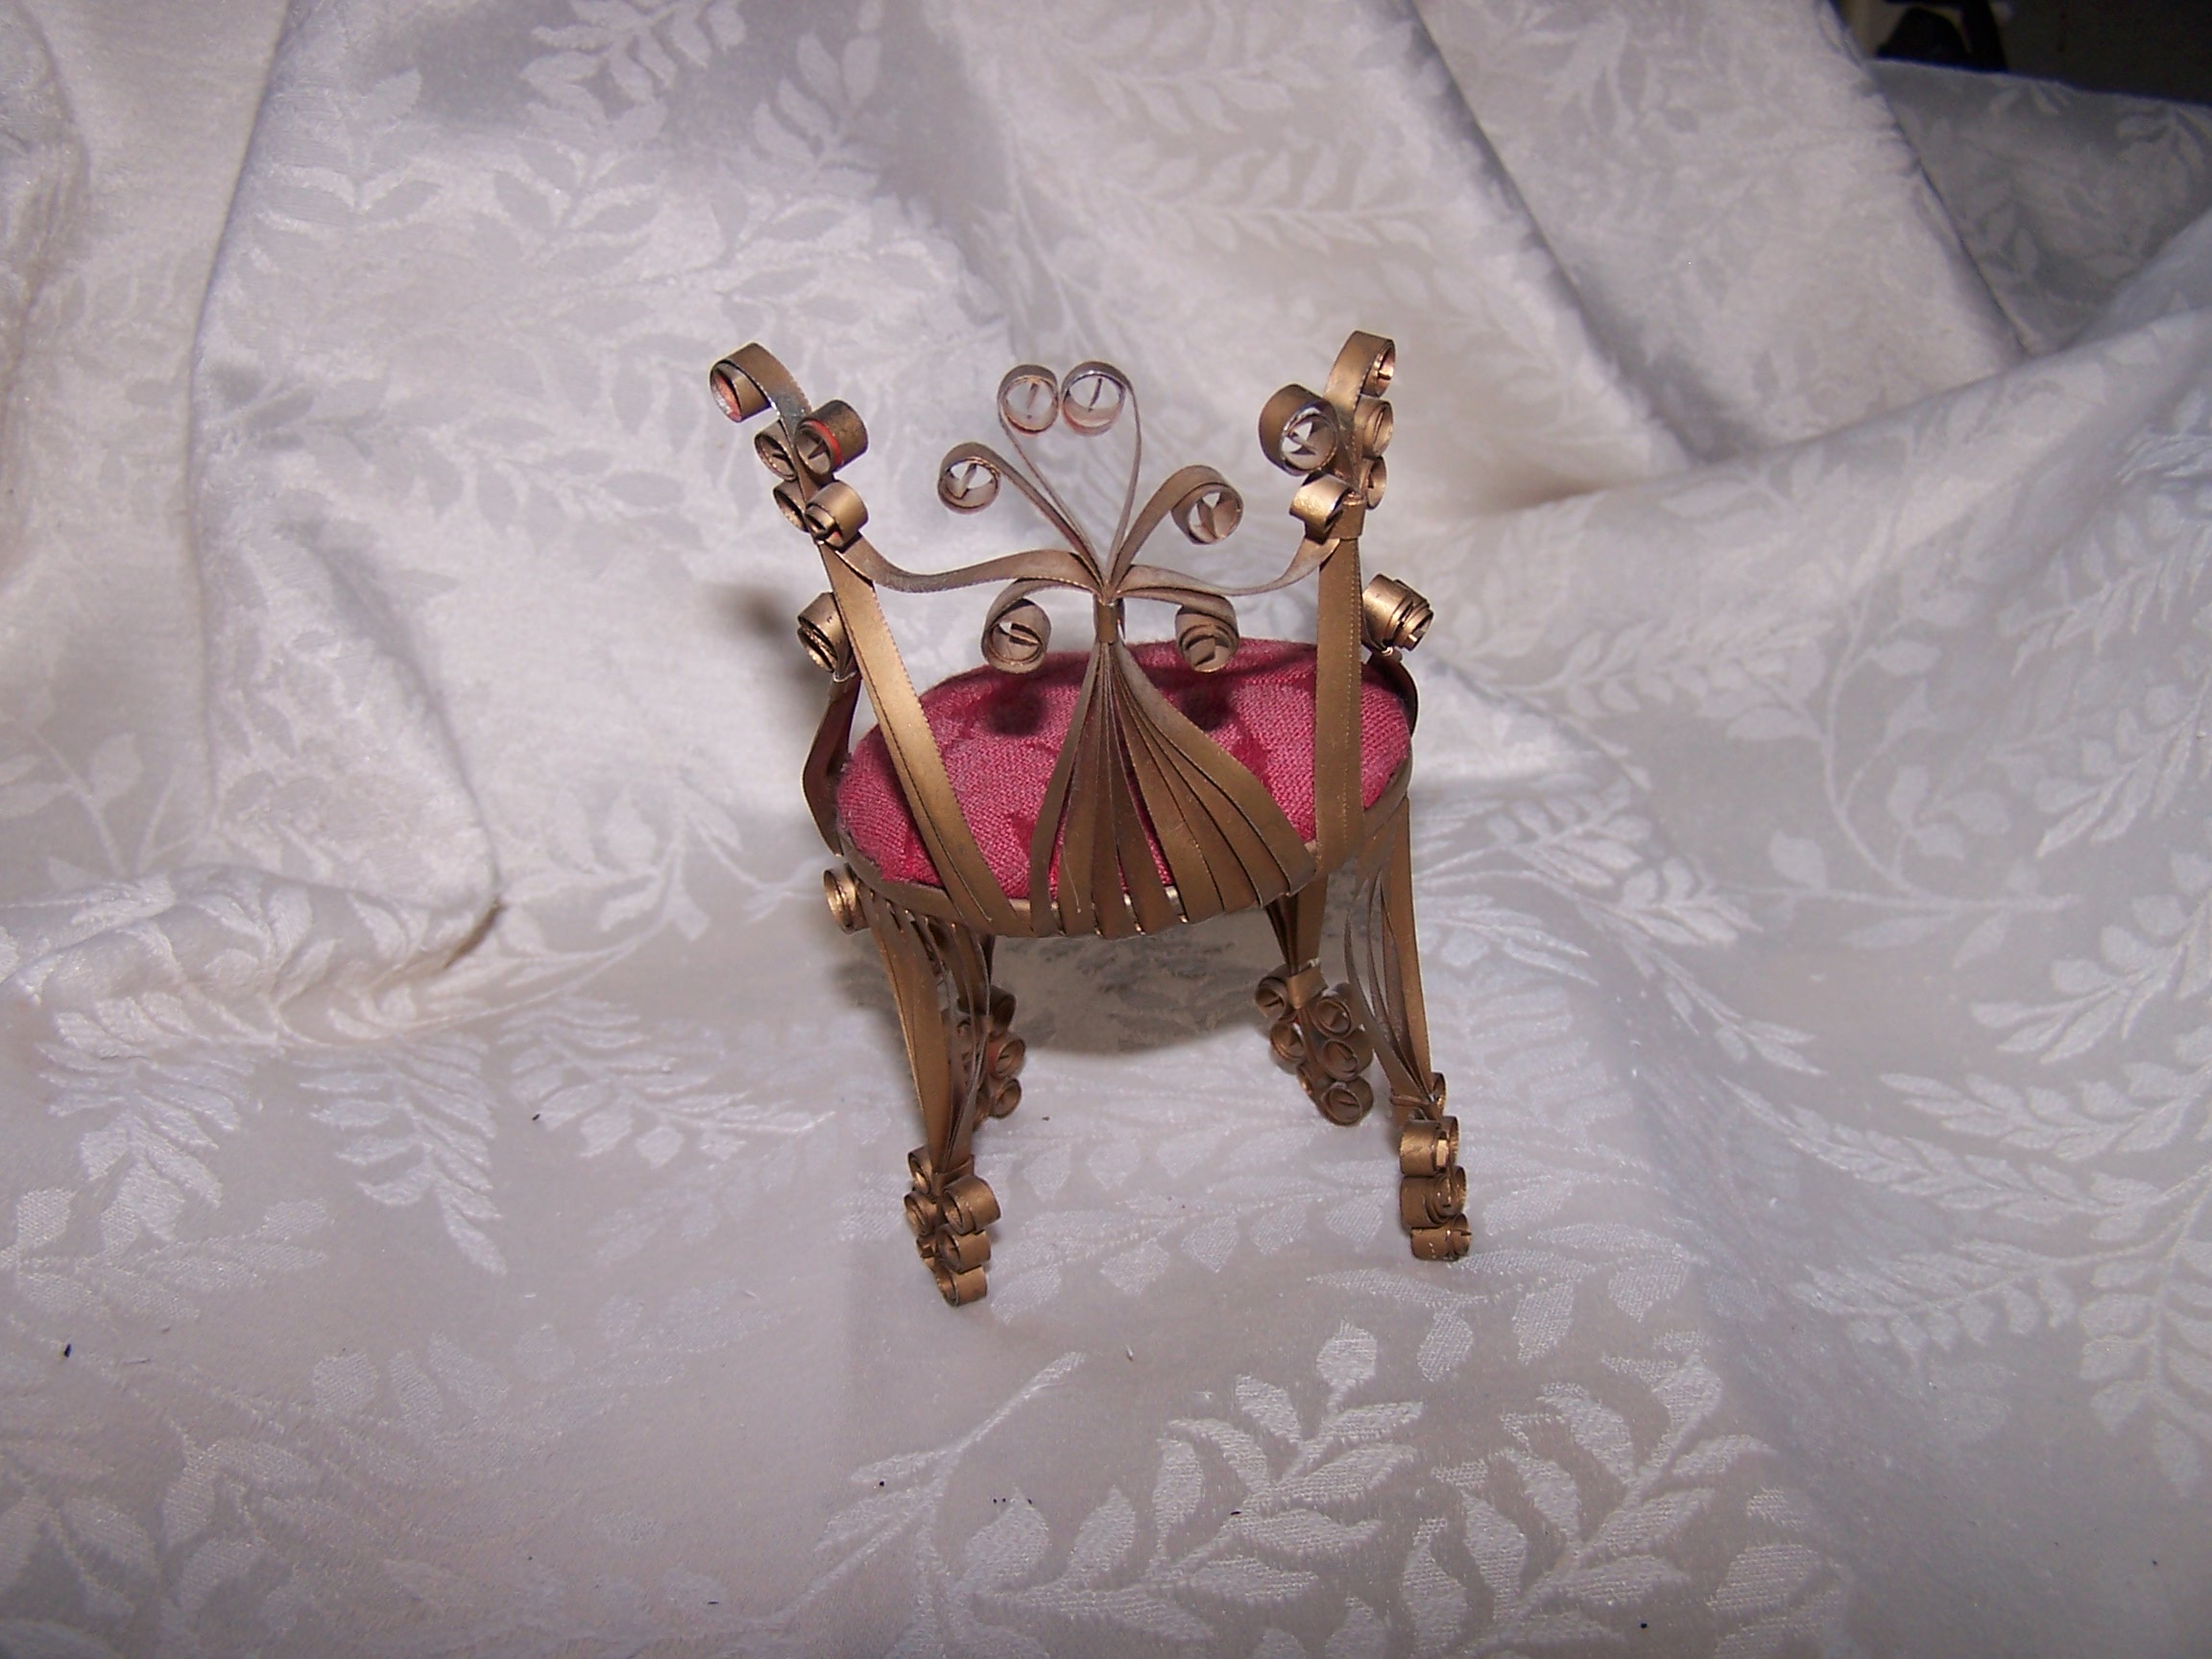 Image 2 of Quilled Pin Cushion Chair, Gold, Red, Folk Art, Vintage